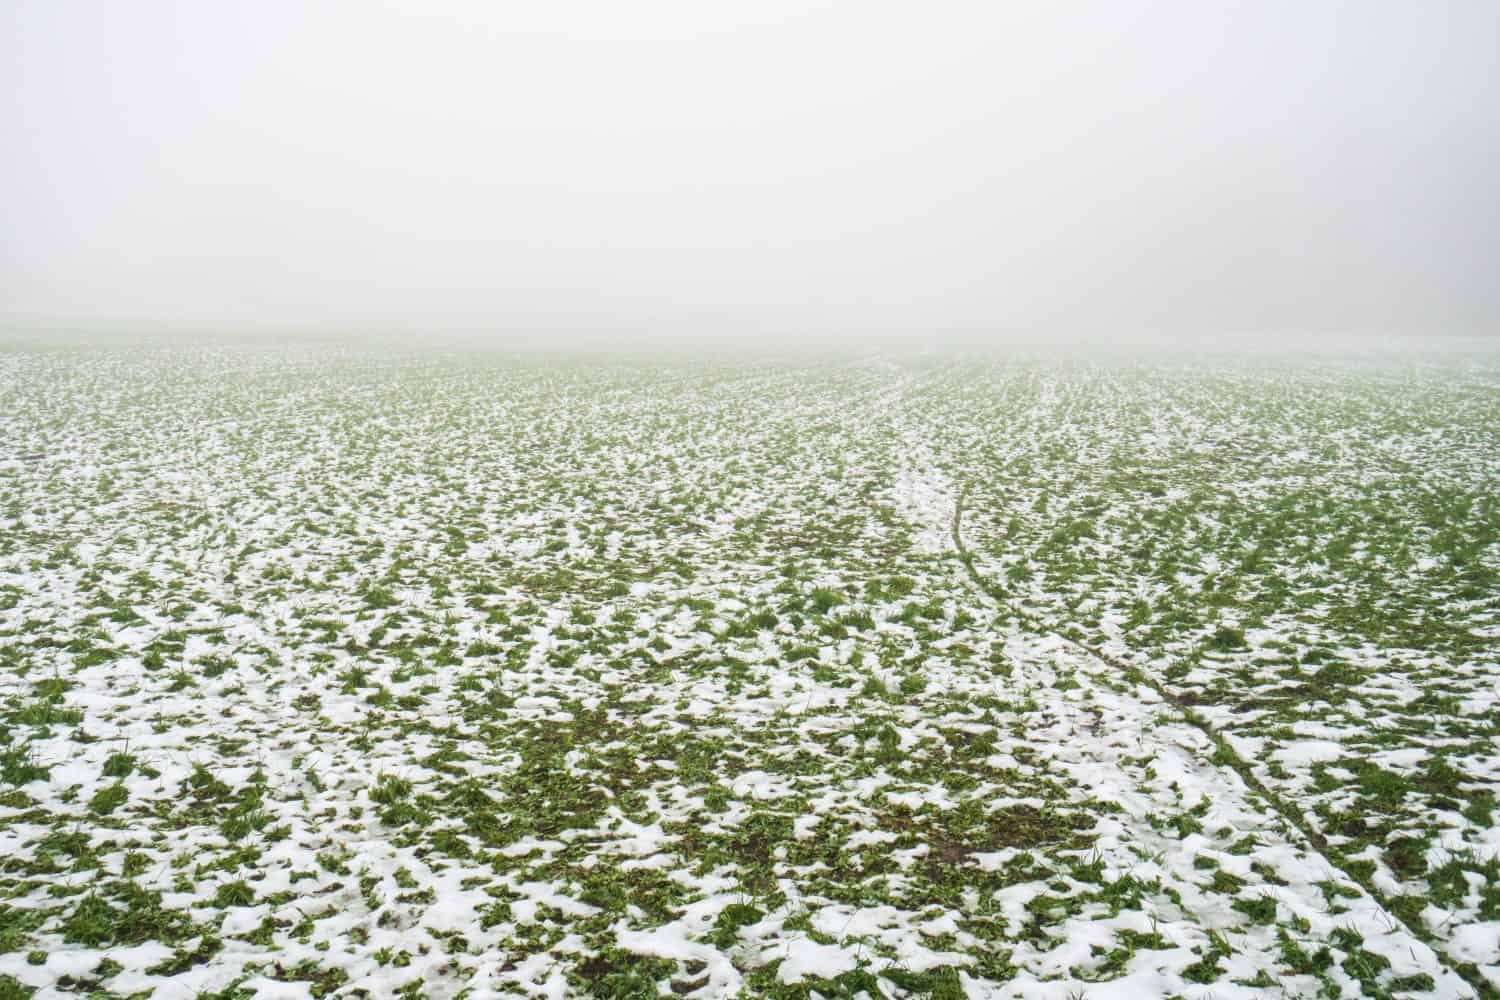 Melting snow and green grass on an agricultural field in Europe. Wide angle view, no people